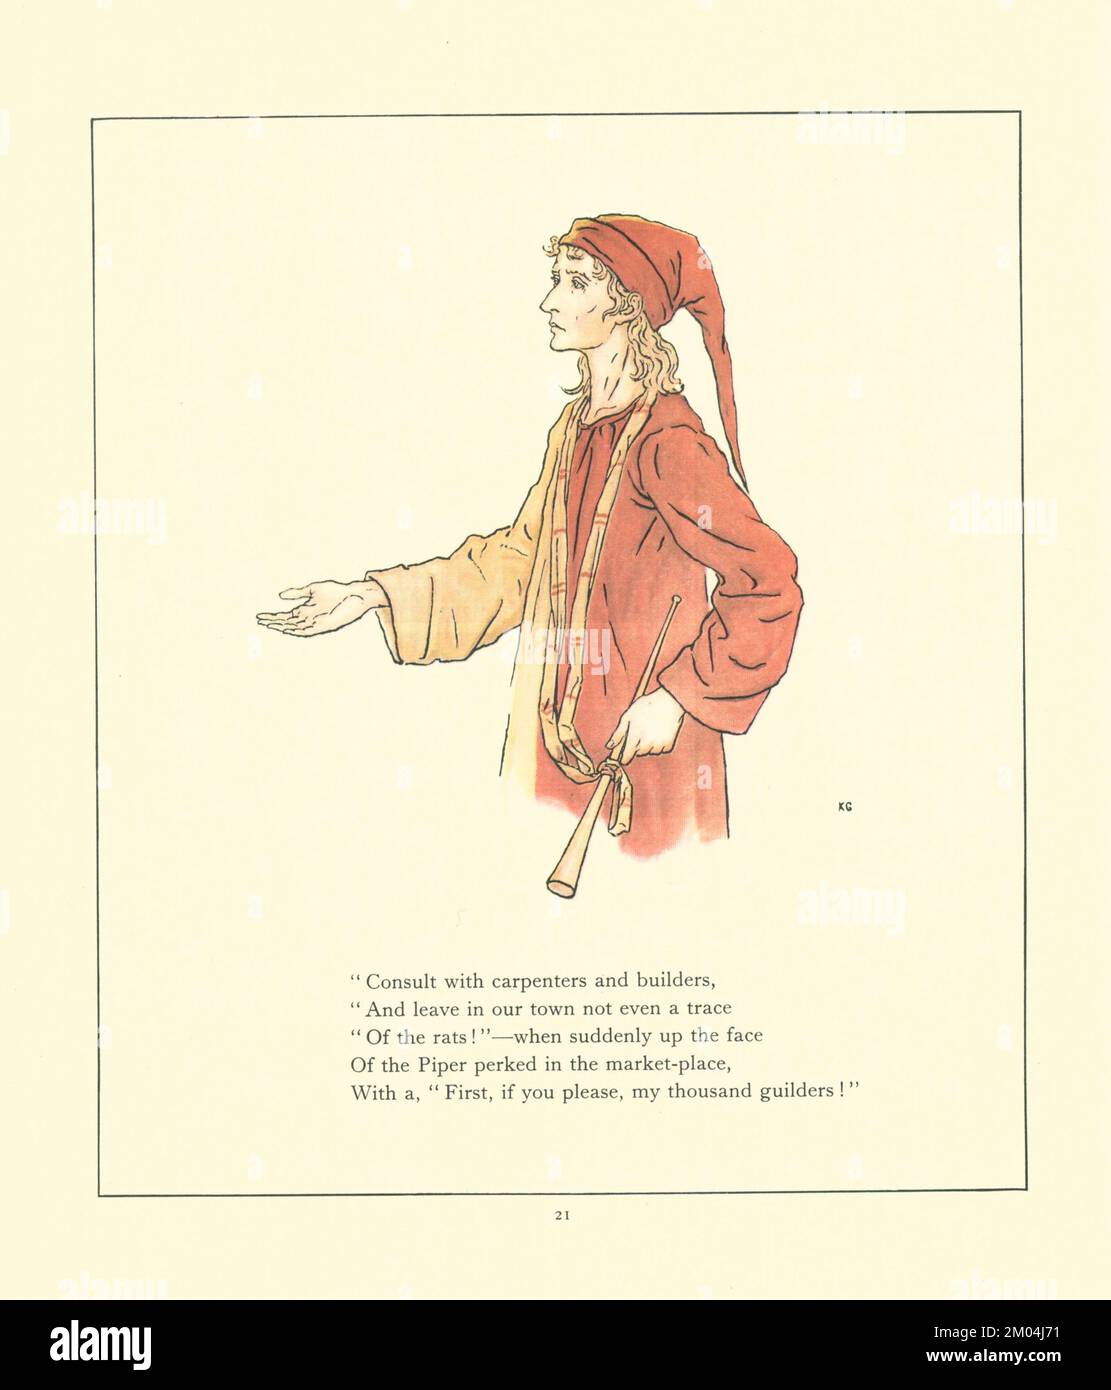 And leave in our town not even a trace Illustrated by KATE GREENAWAY (1846-1901) English artist and writer. for The Pied Piper of Hamelin by Robert Browning, 1812-1889 Published by Warne in 1910 Stock Photo